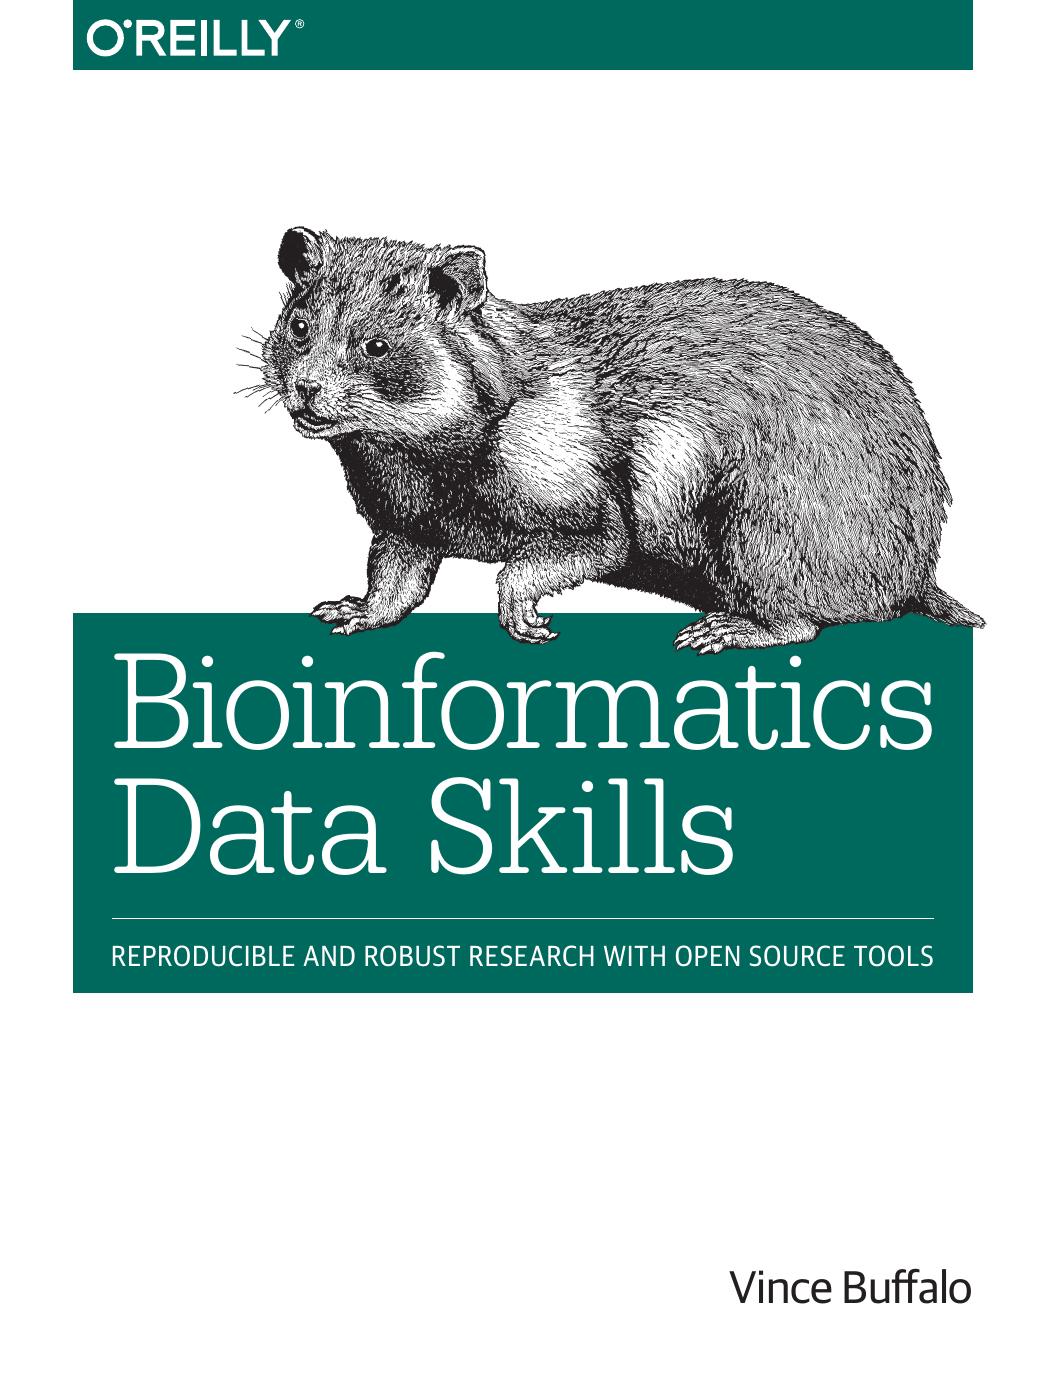 Bioinformatics Data Skills: Reproducible and Robust Research with Open Source Tools by Vince Buffalo